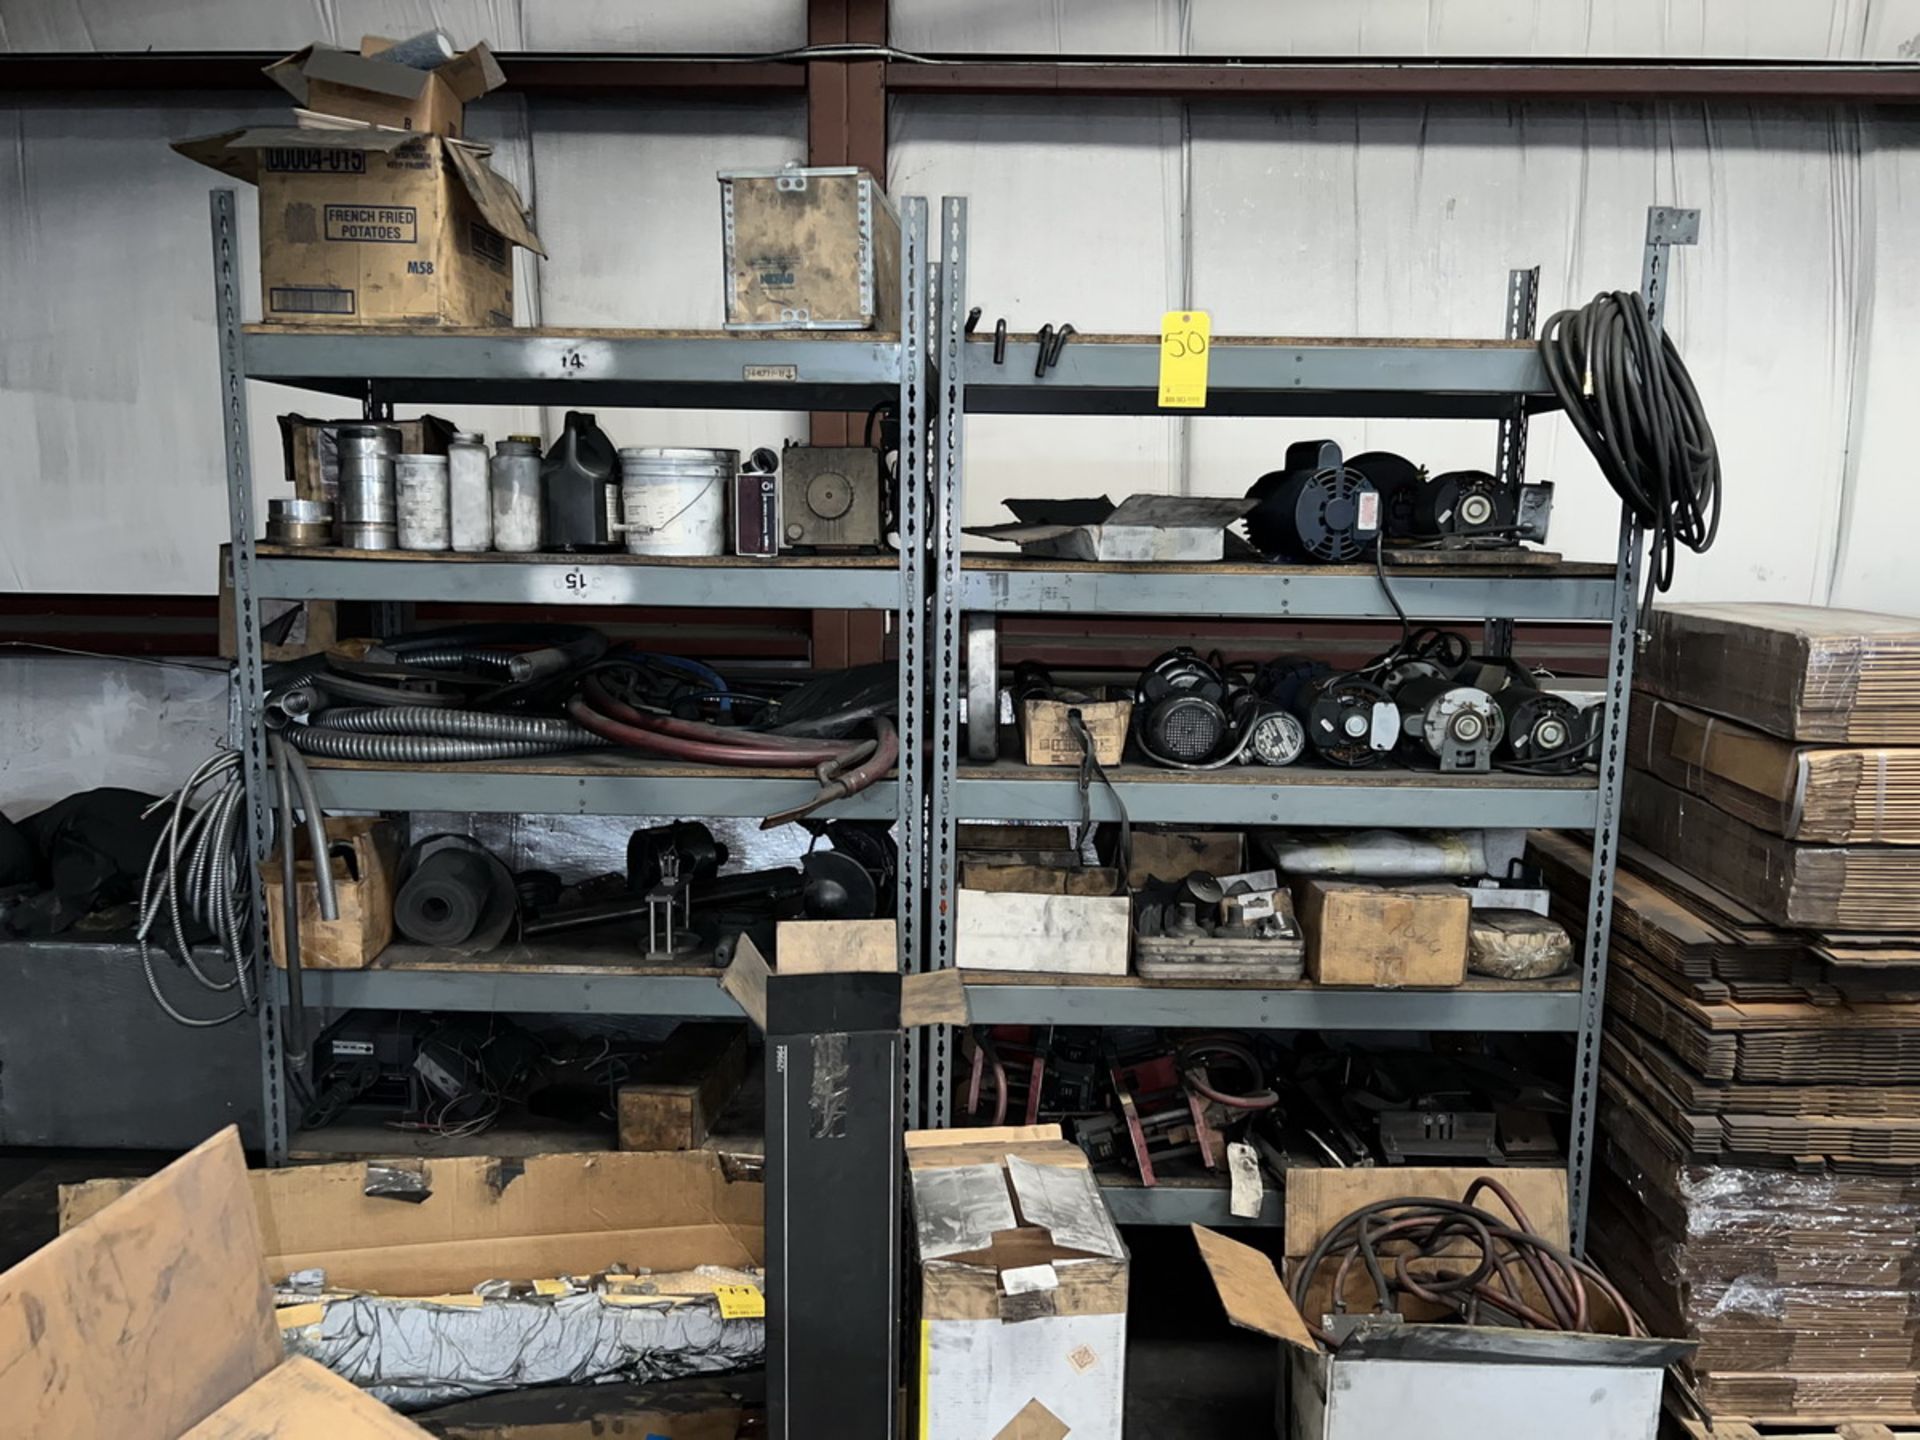 (2) 48'' L x 24'' W x 7' H Storage Racks With contents to include various size motors, Hoses,